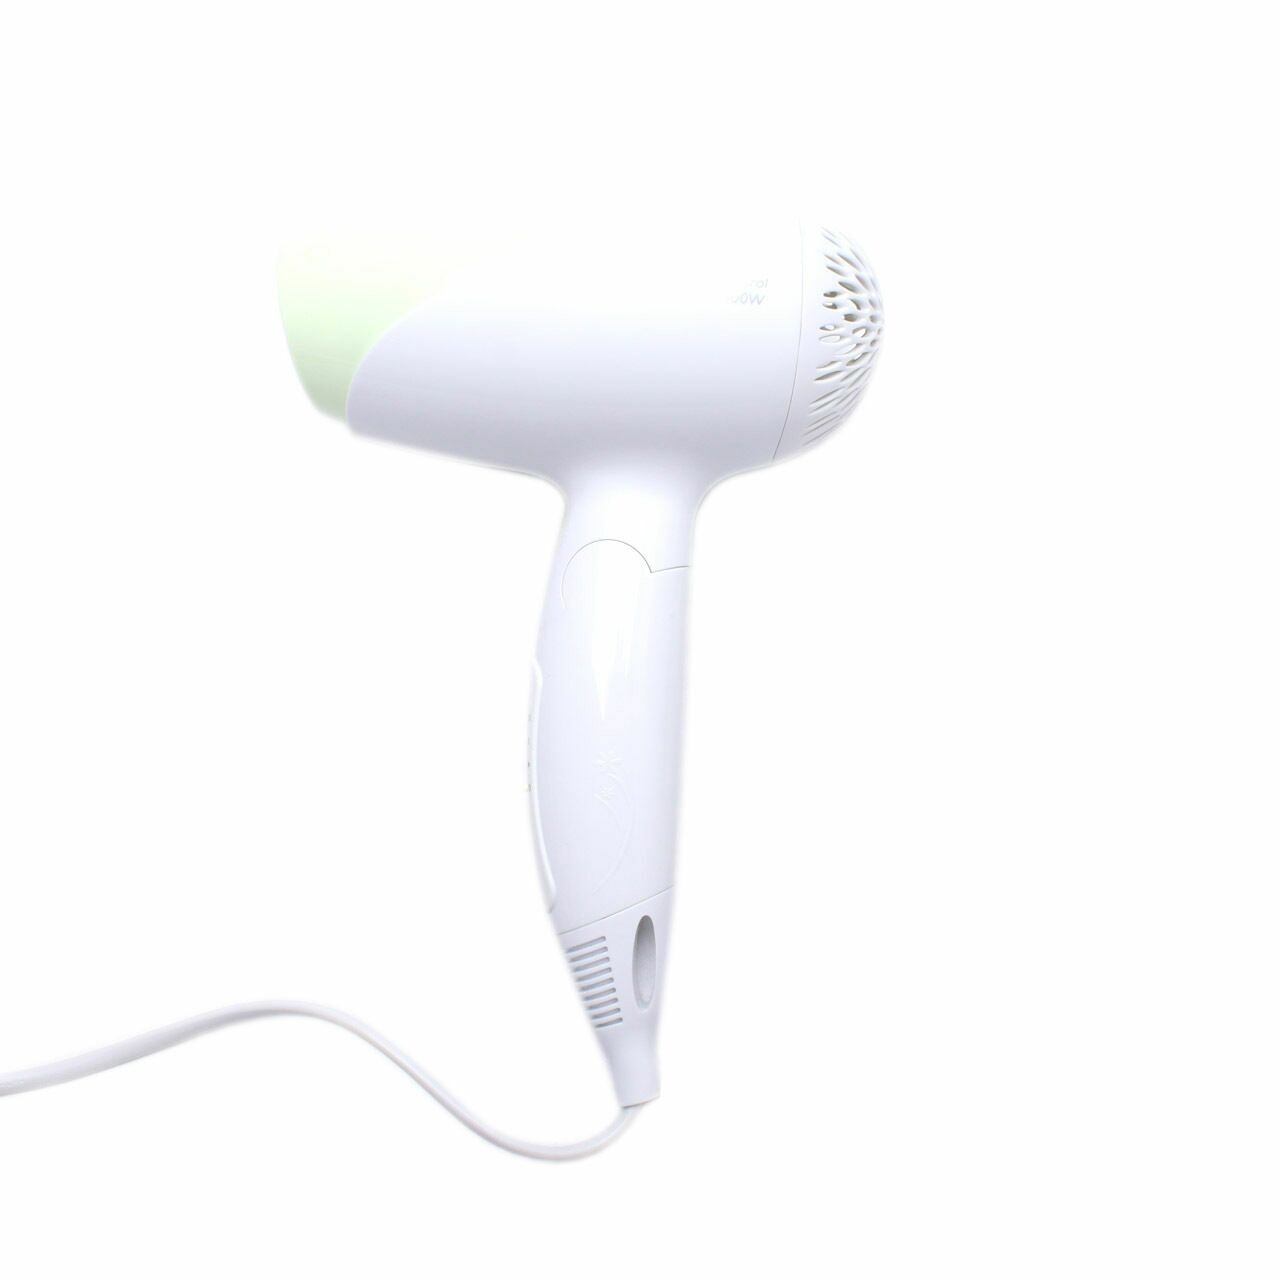 Philips Green & White Care & Control Hairdryer Tools